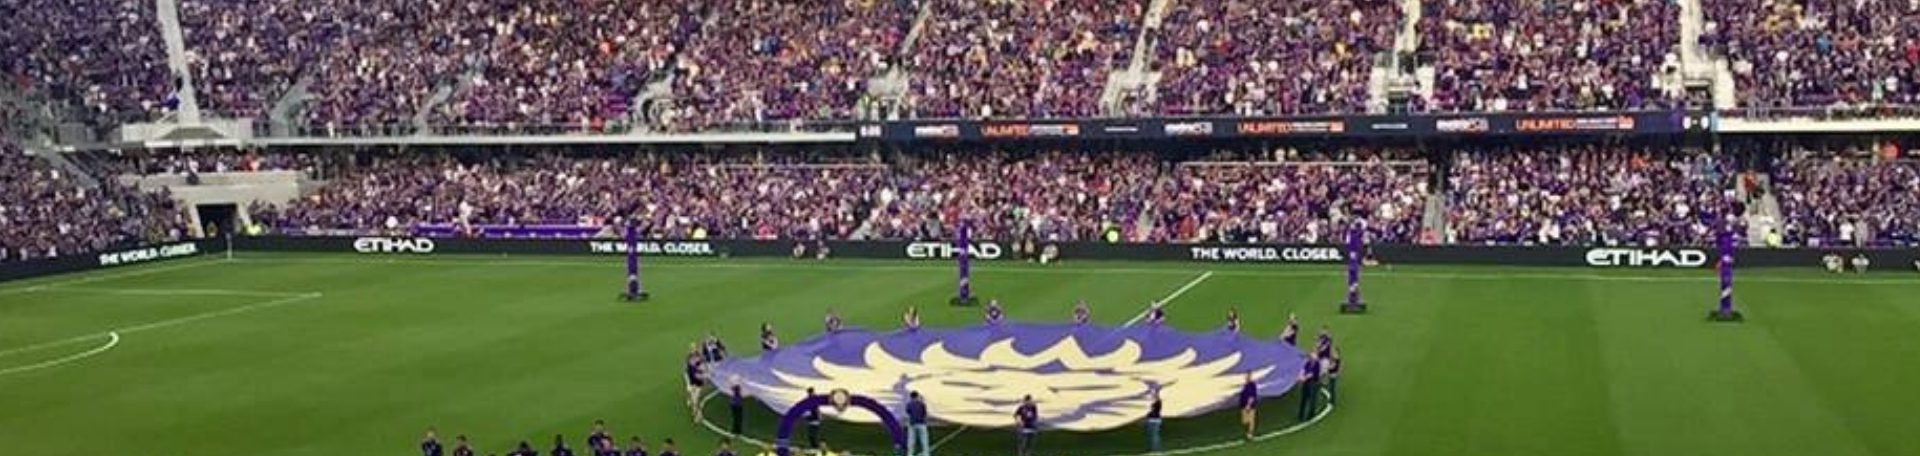 orlando soccer field during game